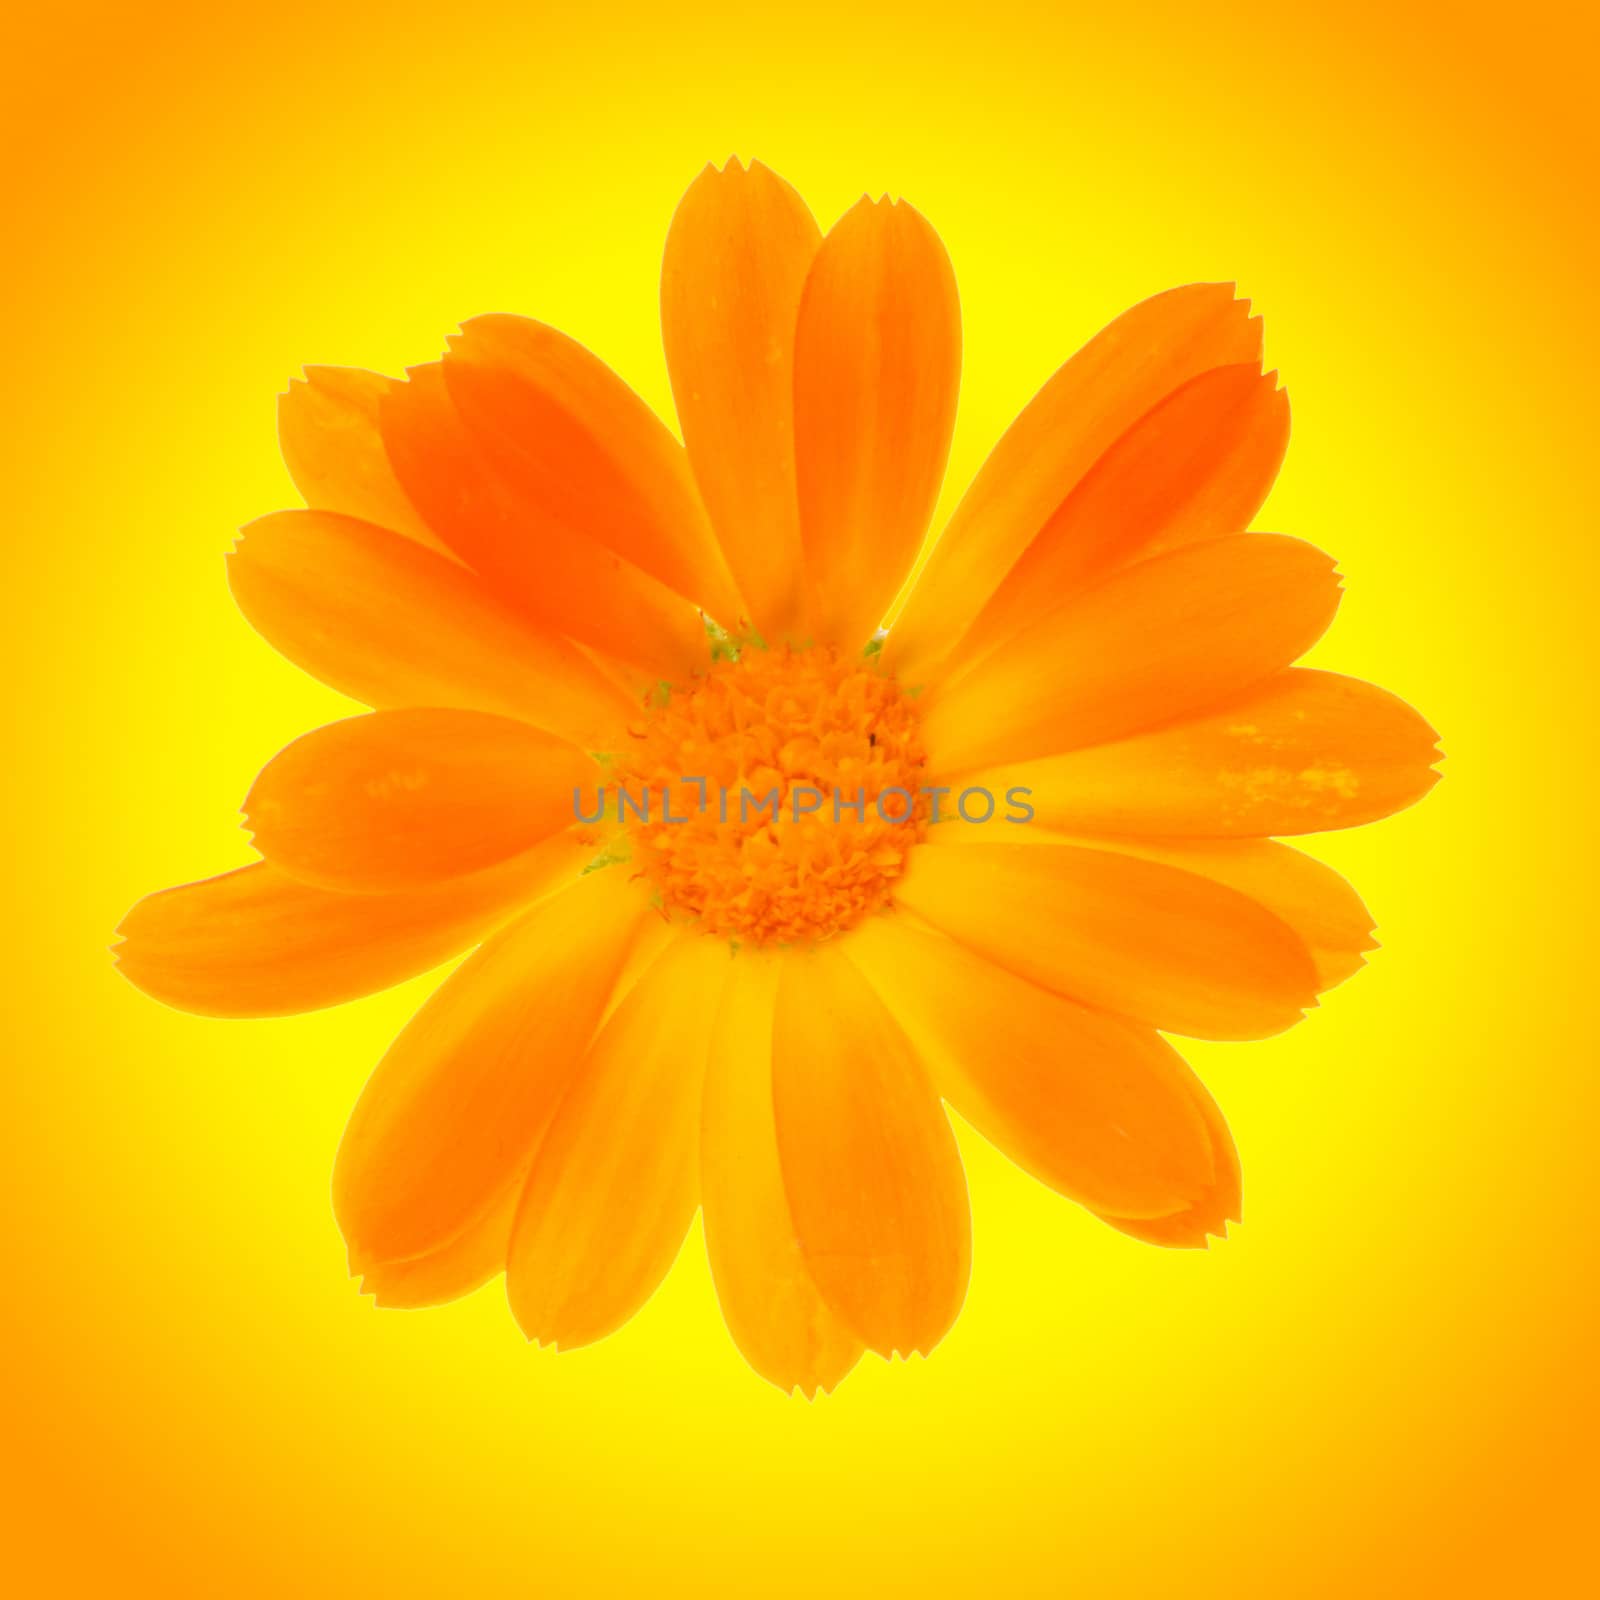 yellow daisy flower isolated on yellow background